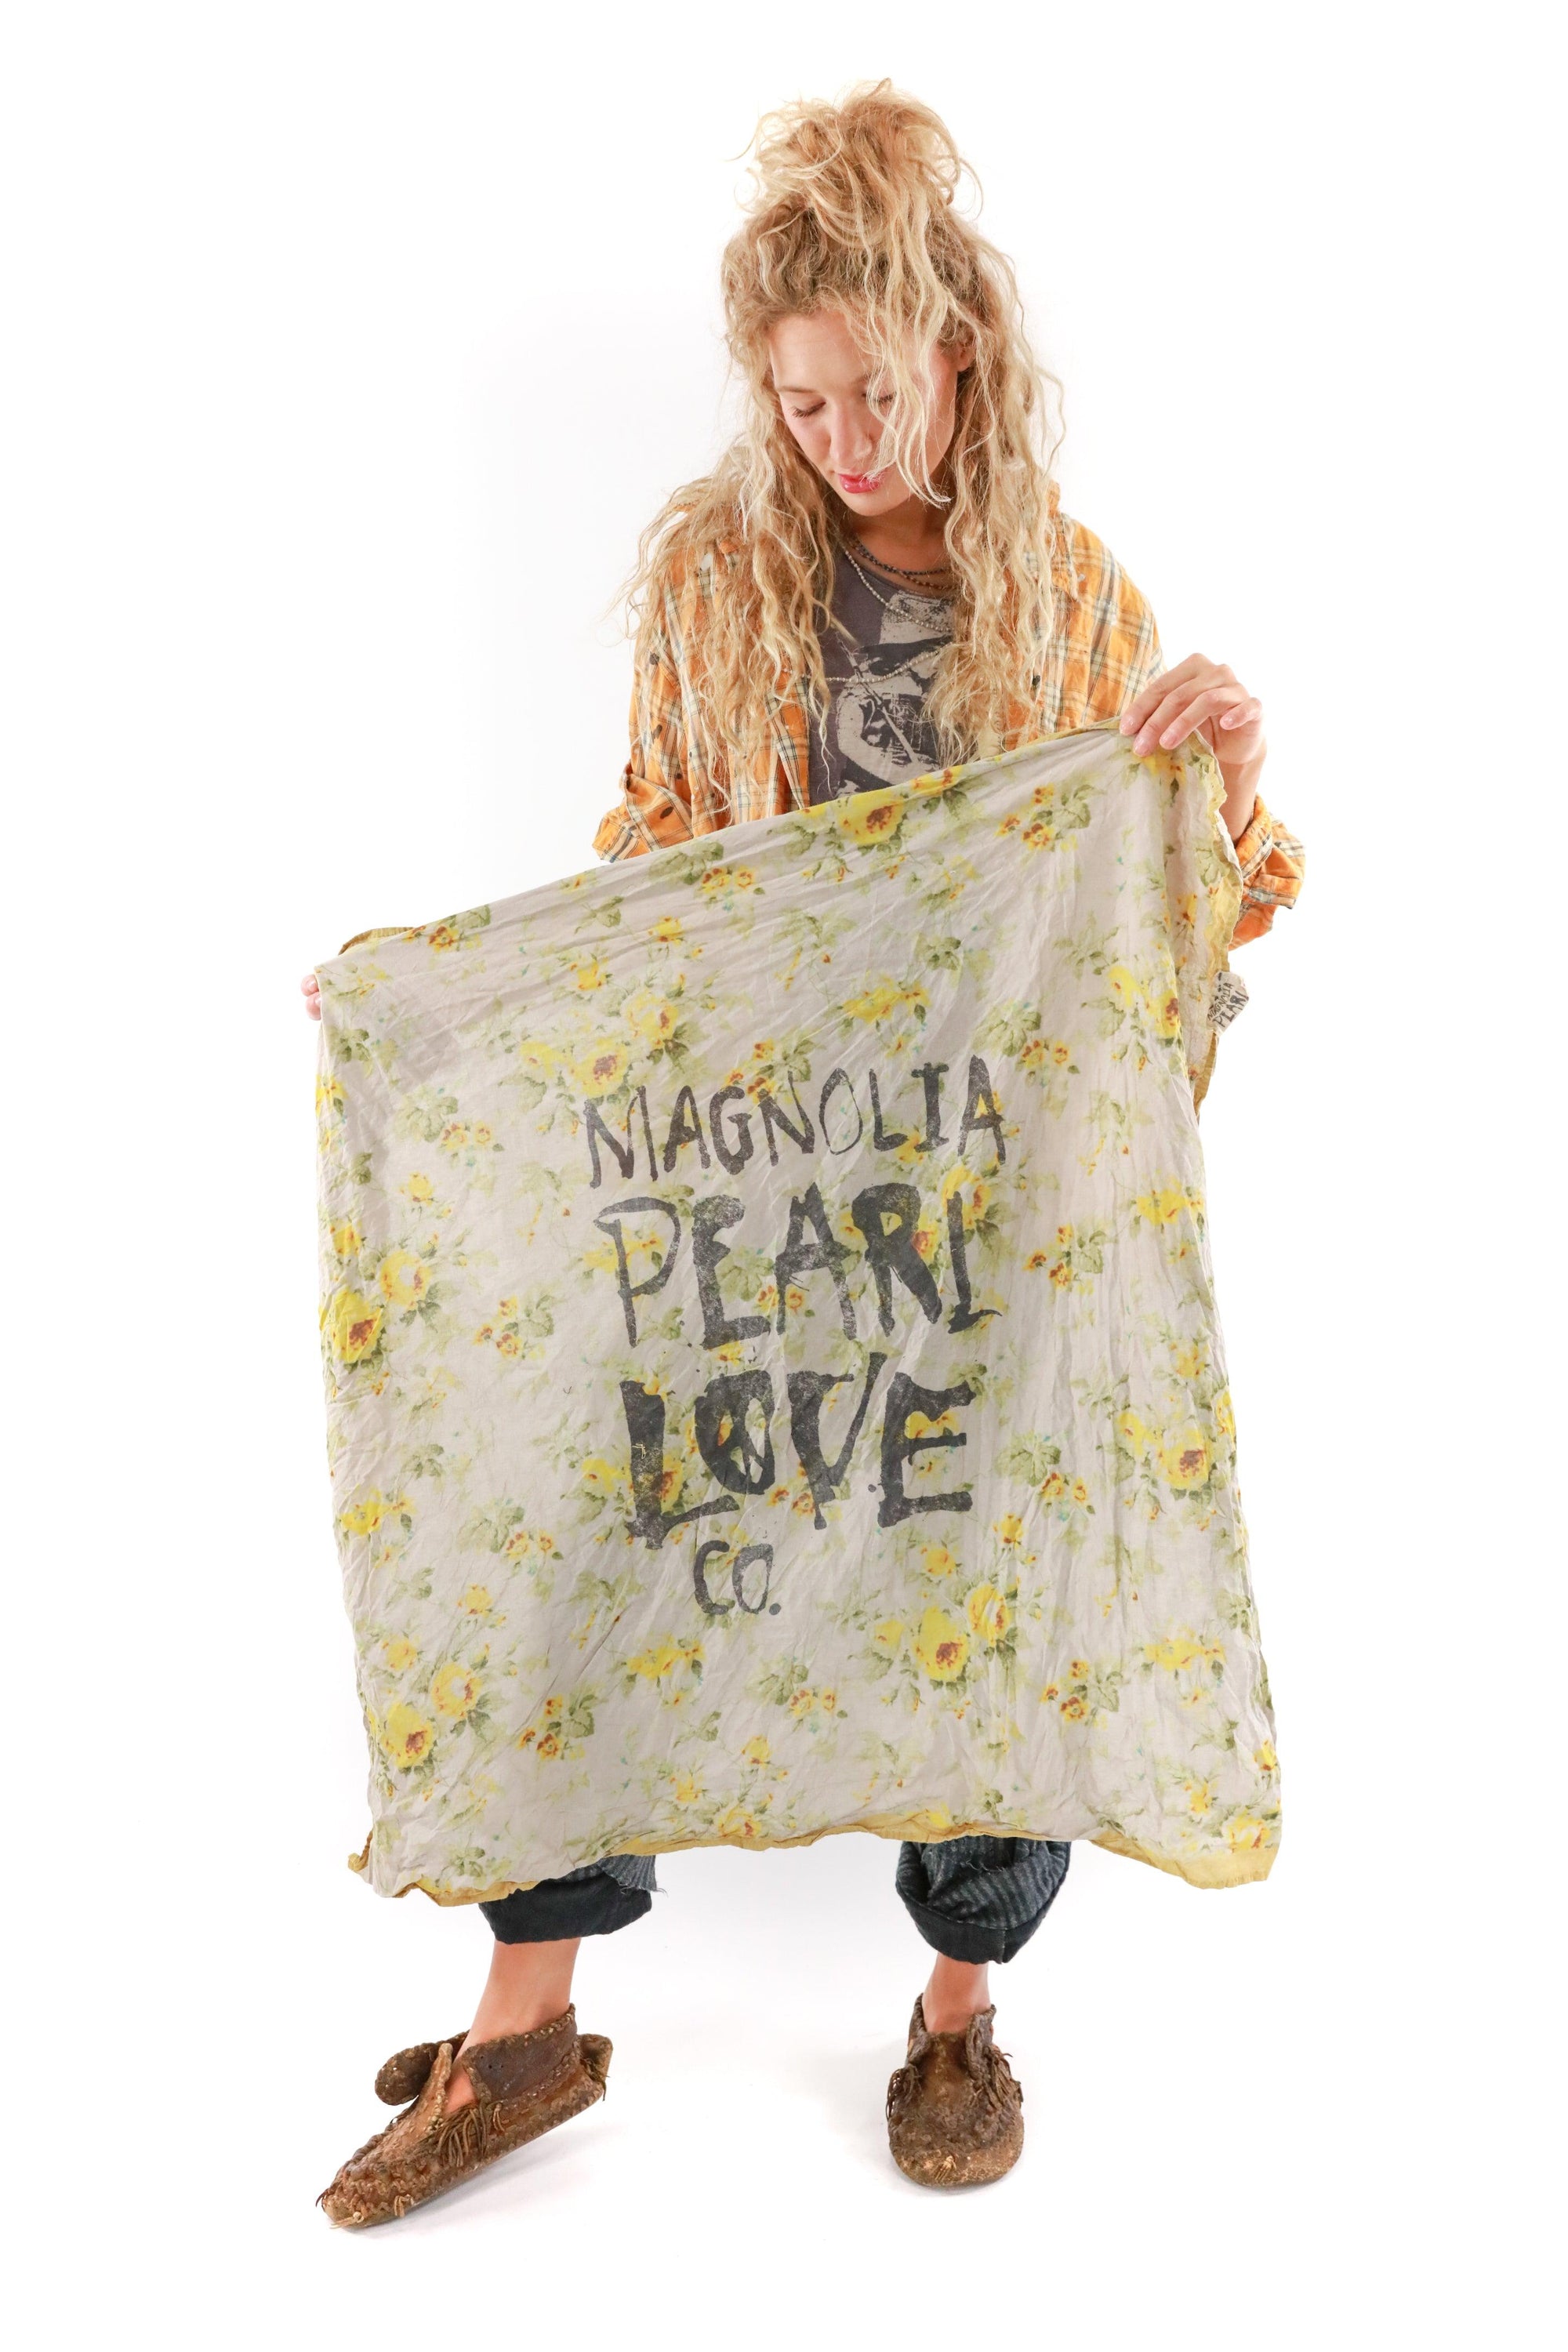 MP Love Co. Floral Scarf - Magnolia Pearl Clothing